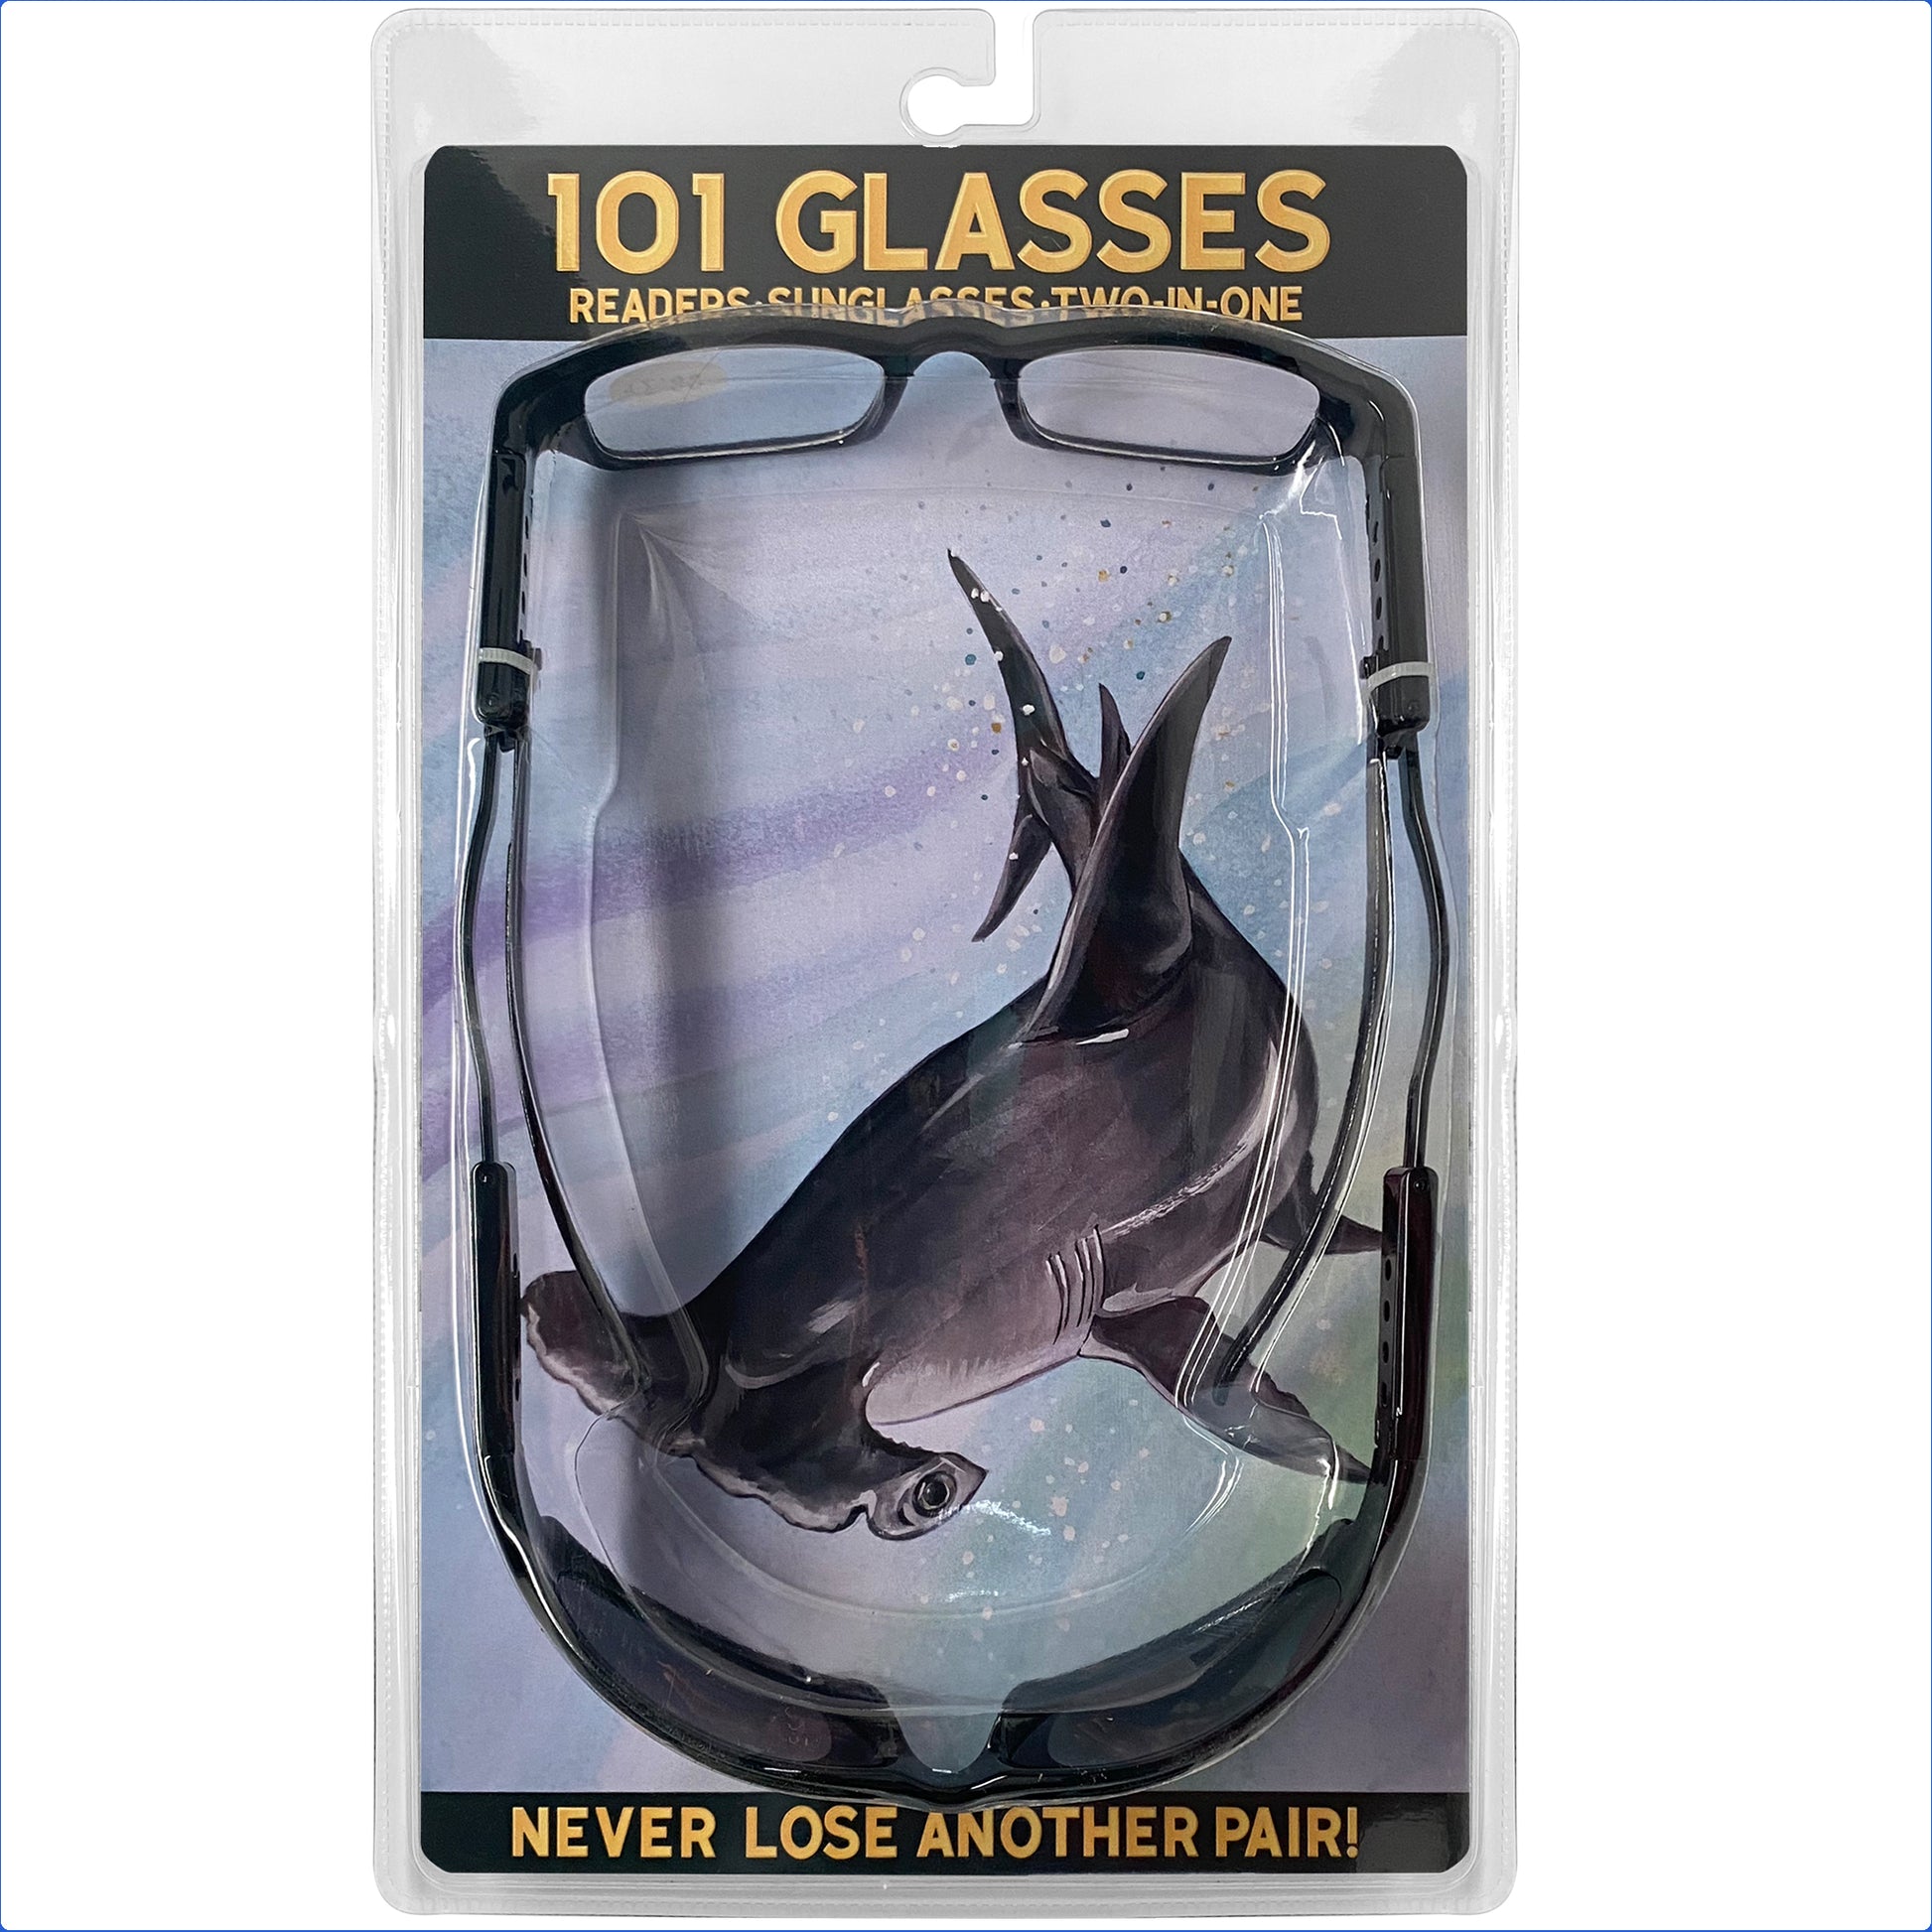 Never lose the glasses again with a decorative glasses holder.